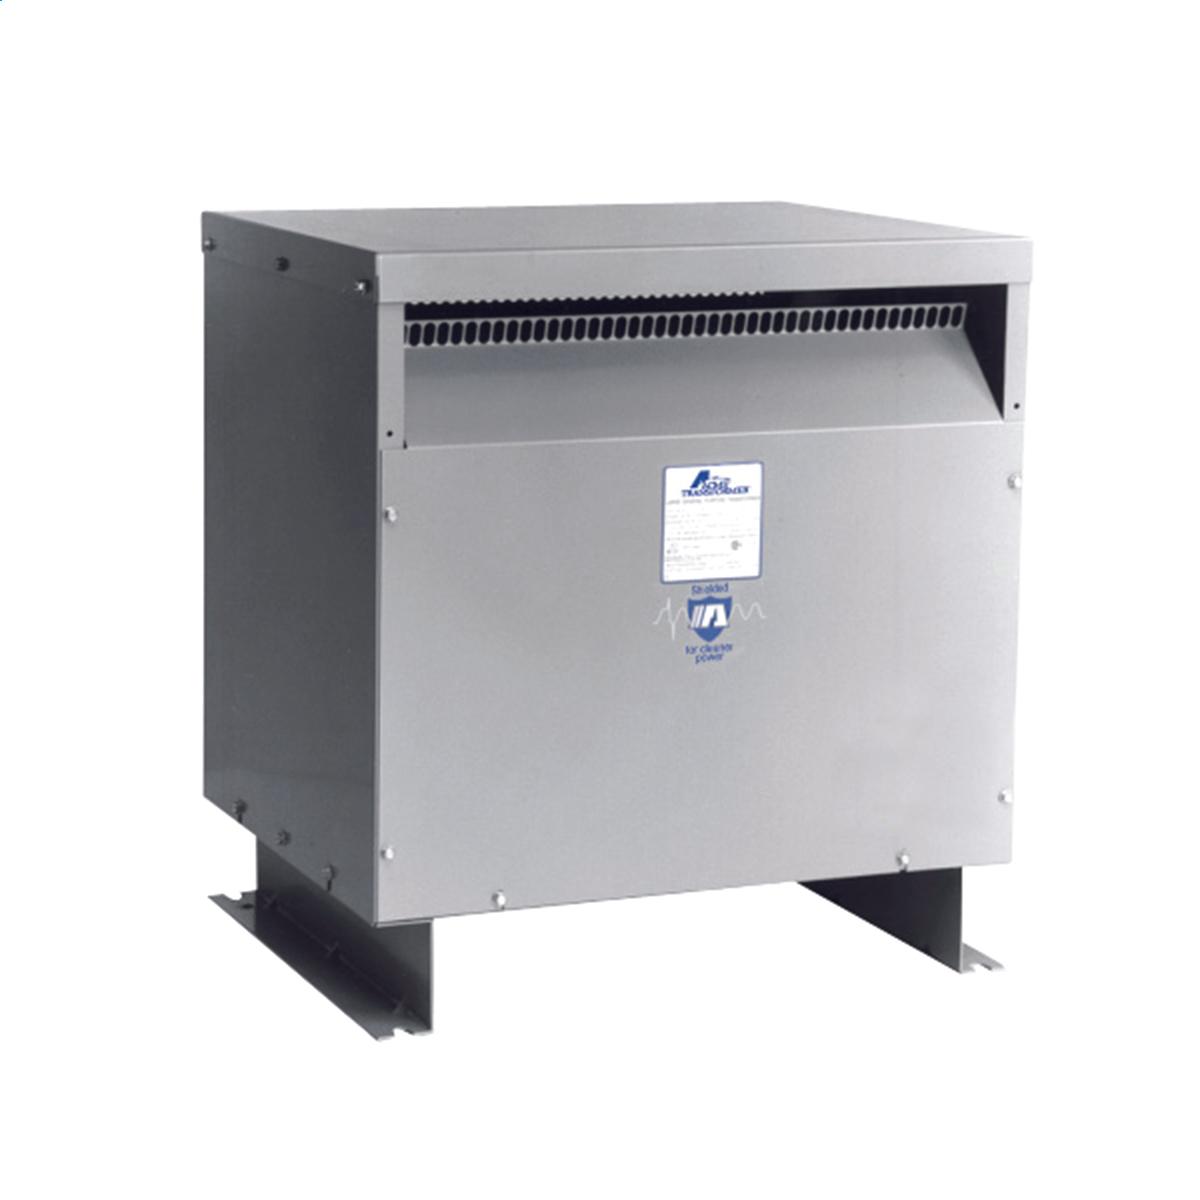 Hubbell WB015K01 Medium Voltage Transformer - Single Phase, 2400 - 120/240V, 15kVA  ; Lower operating cost over Liquid-filled ; No additional fireproofing or venting ; Long life expectancy ; Smaller, lighter easy to maintain